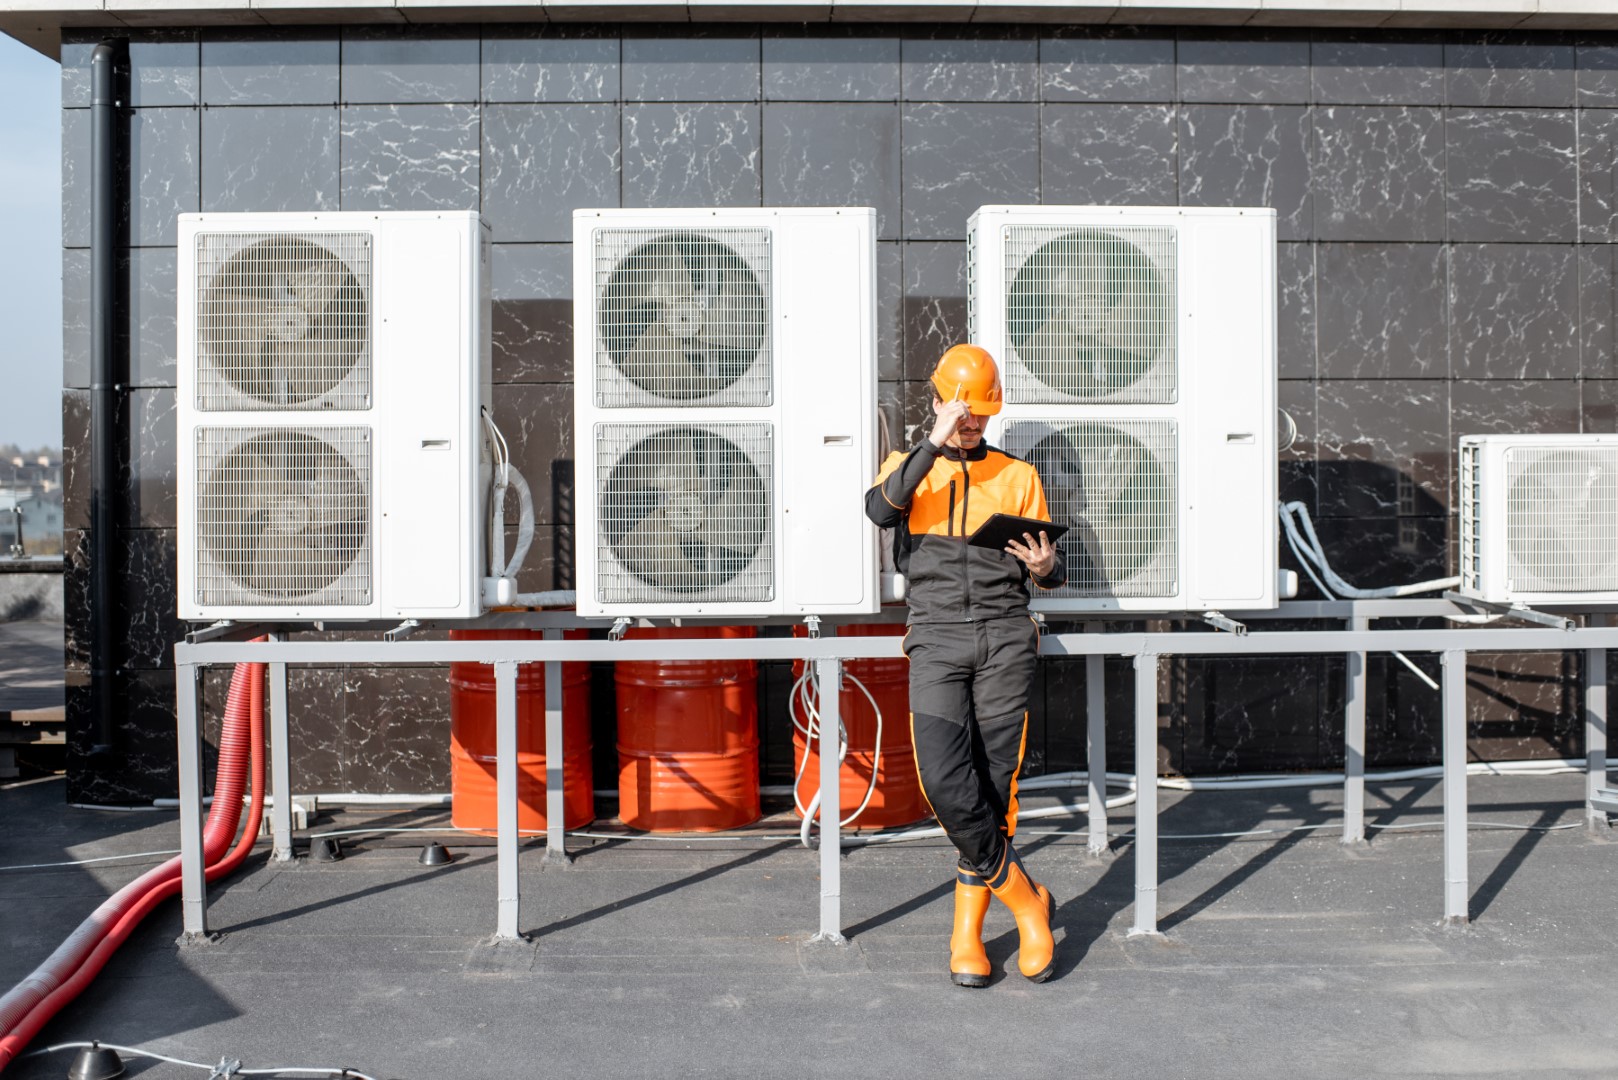 Egineer in protective workwear designing with digital tablet, while standing near the outdoor units of the air conditioner or heat pump